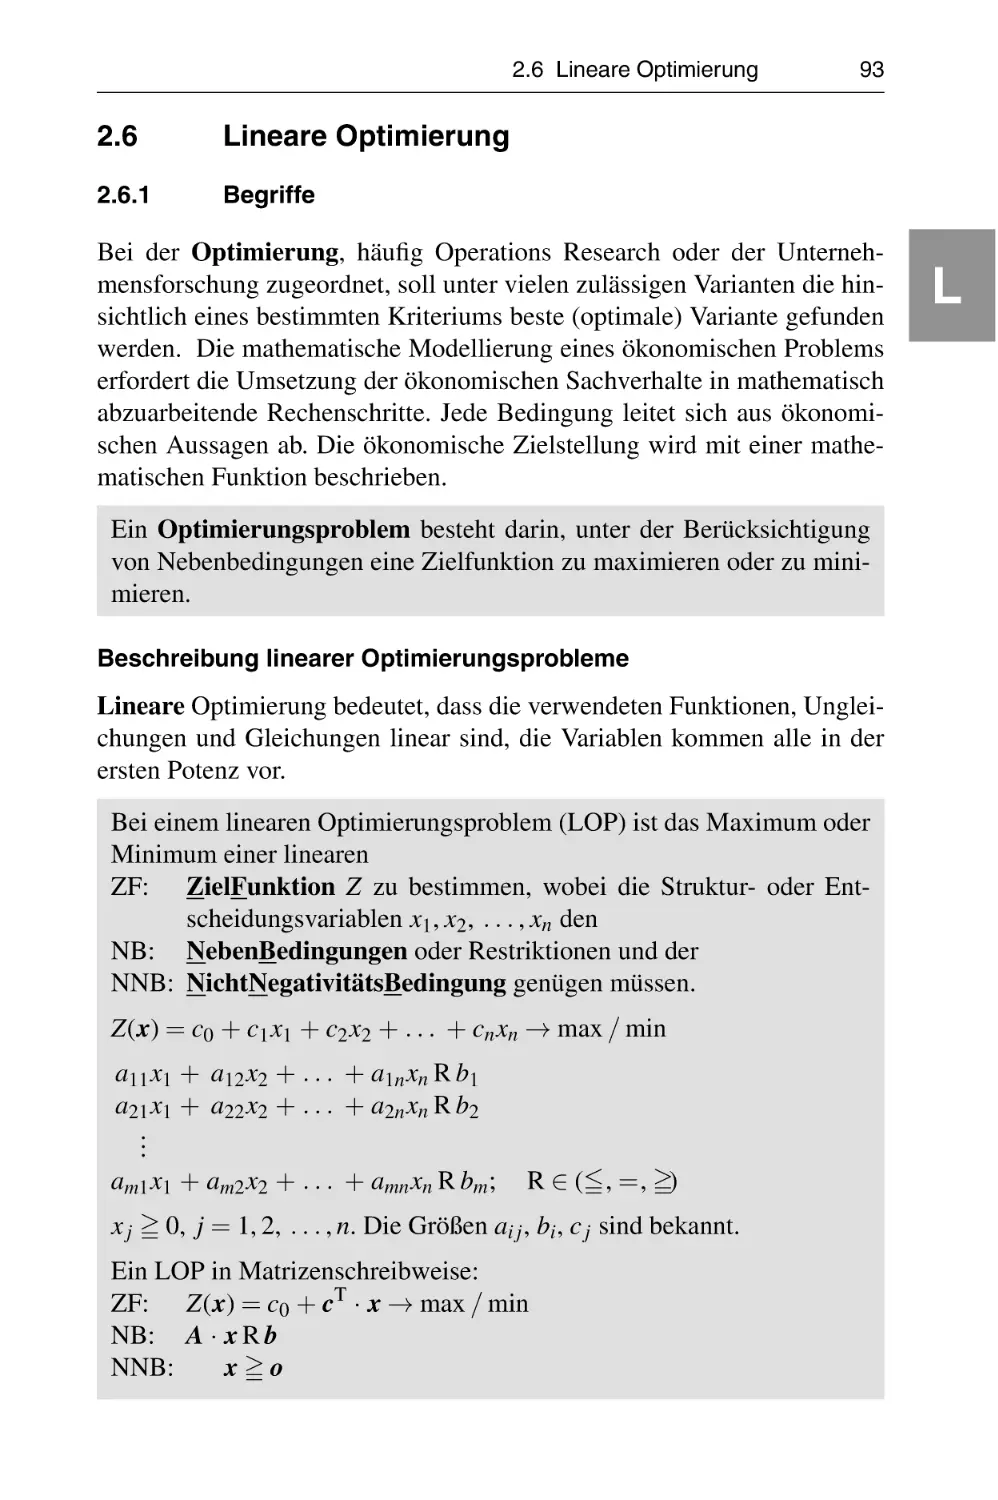 2.6 Lineare Optimierung
2.6.1 Begriffe